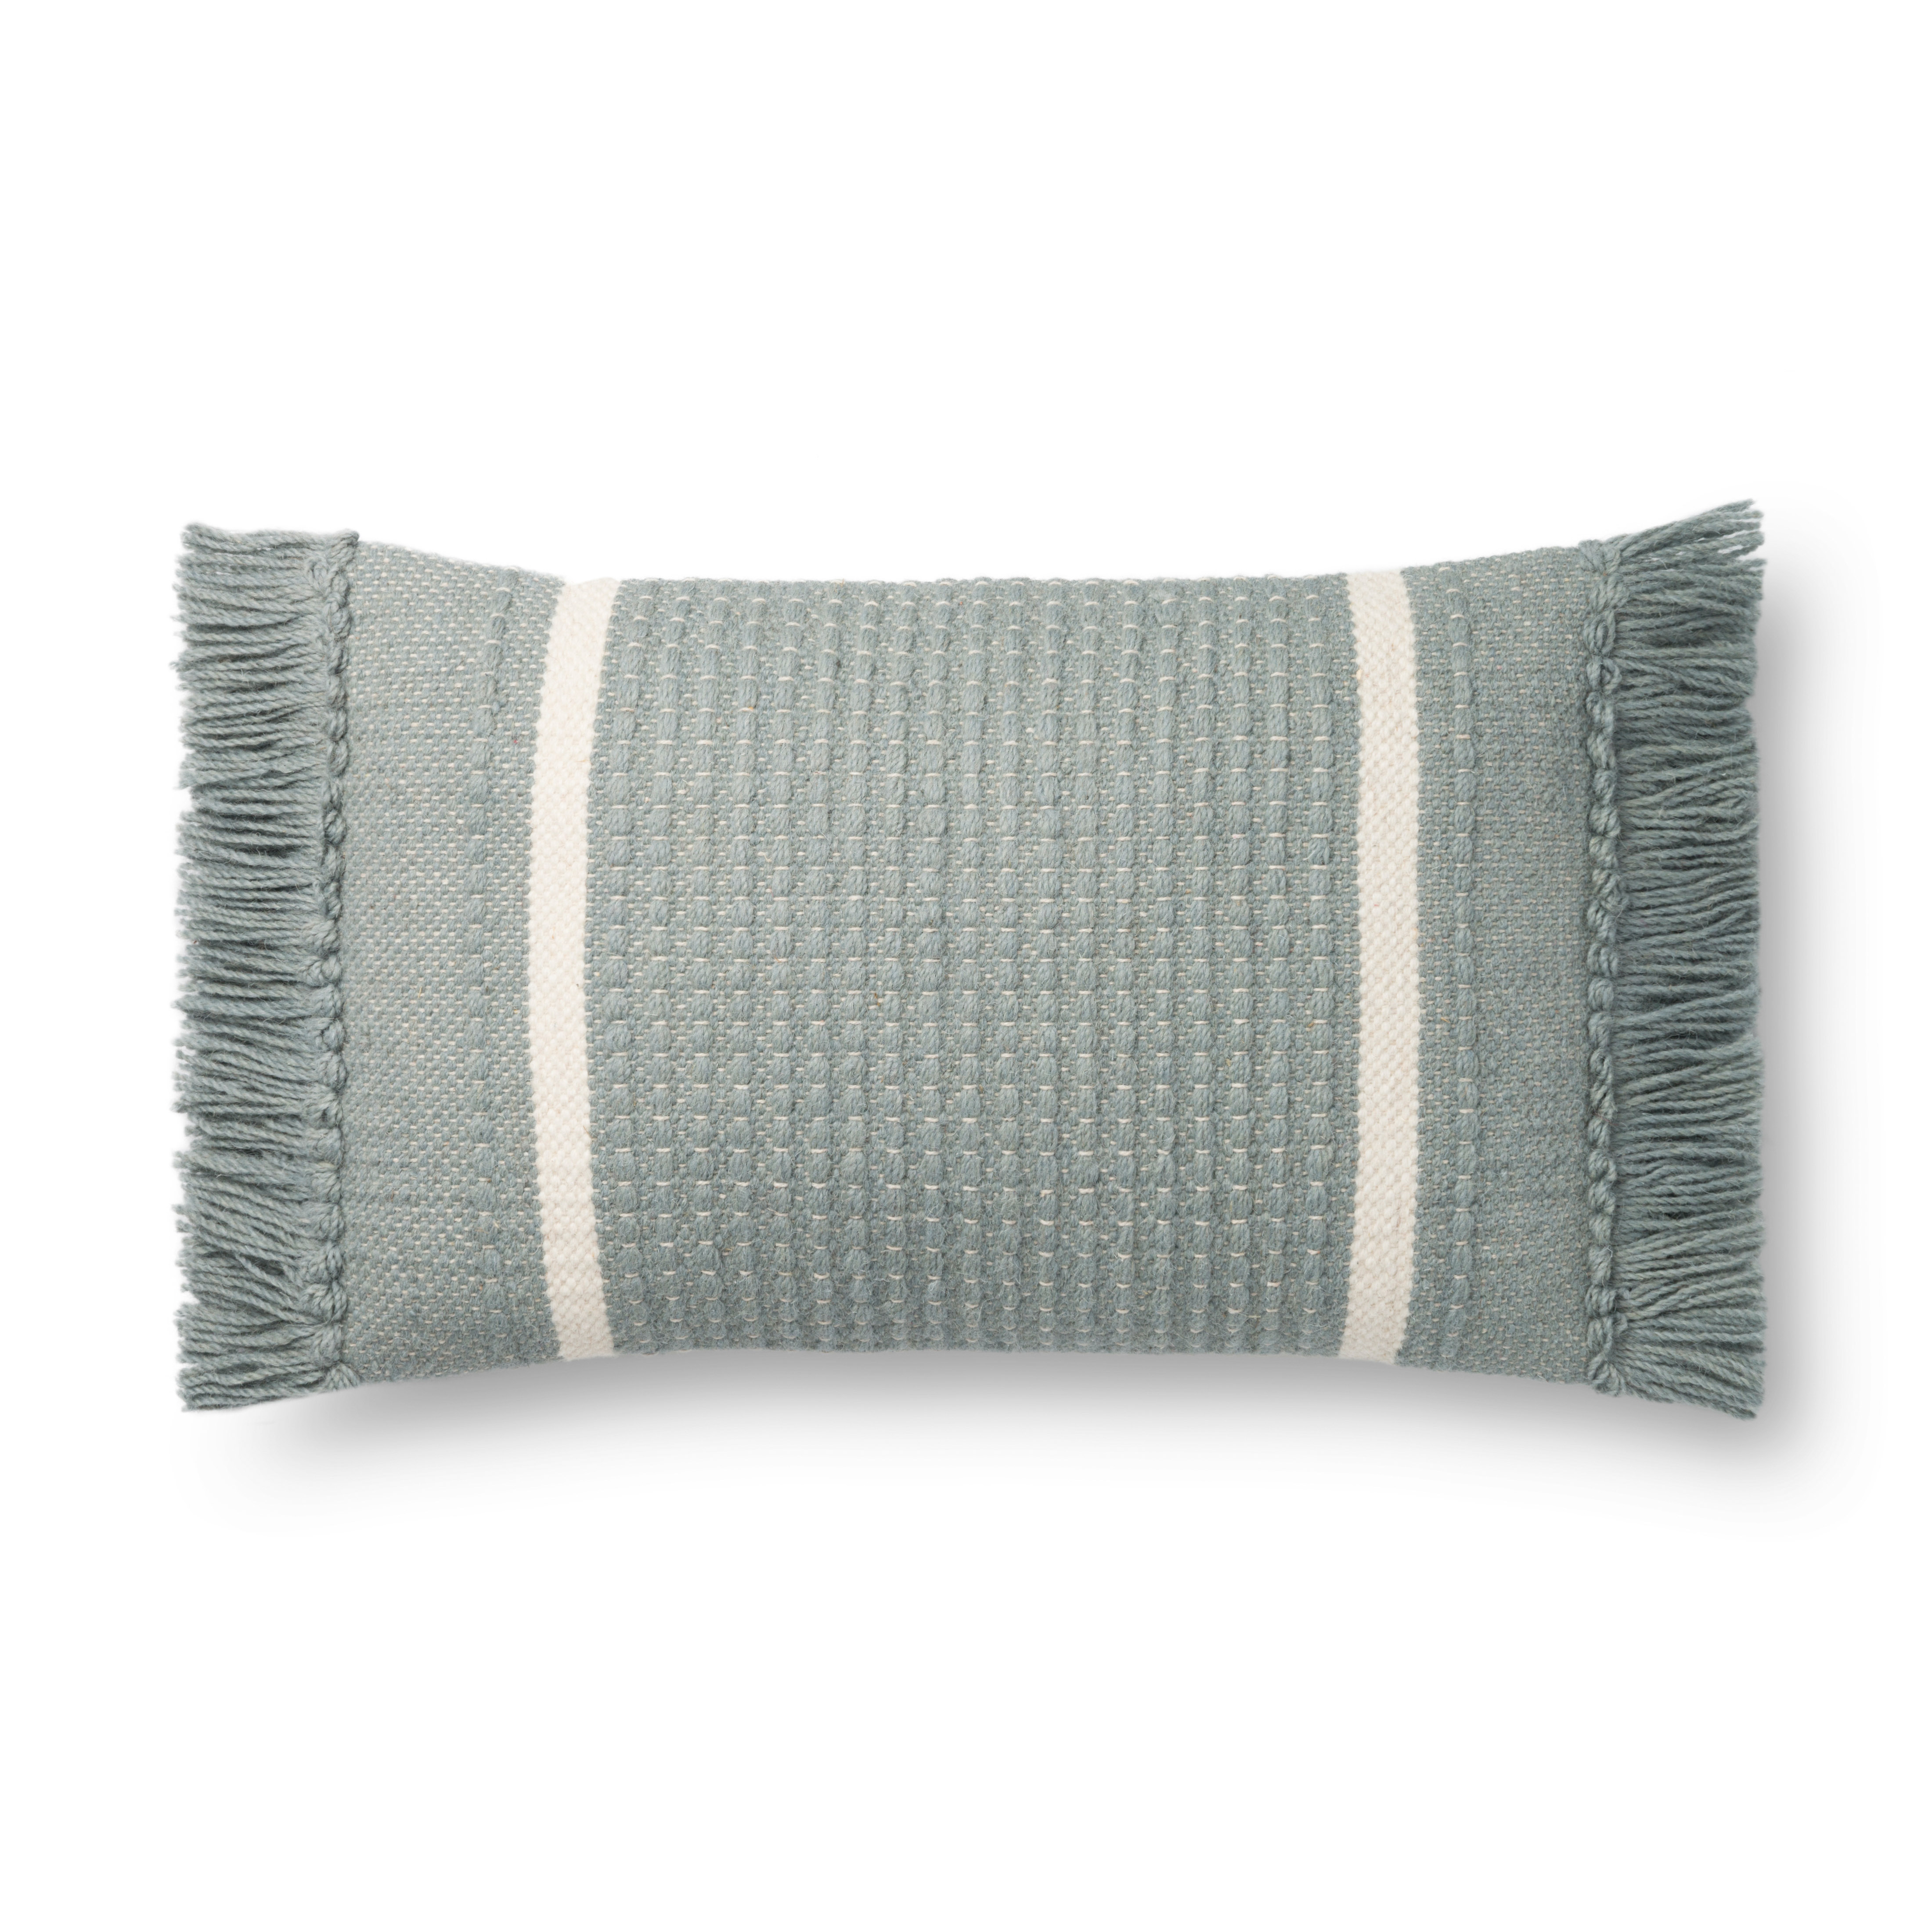 PILLOWS P1128 BLUE 13" x 21" Cover w/Poly - Magnolia Home by Joana Gaines Crafted by Loloi Rugs